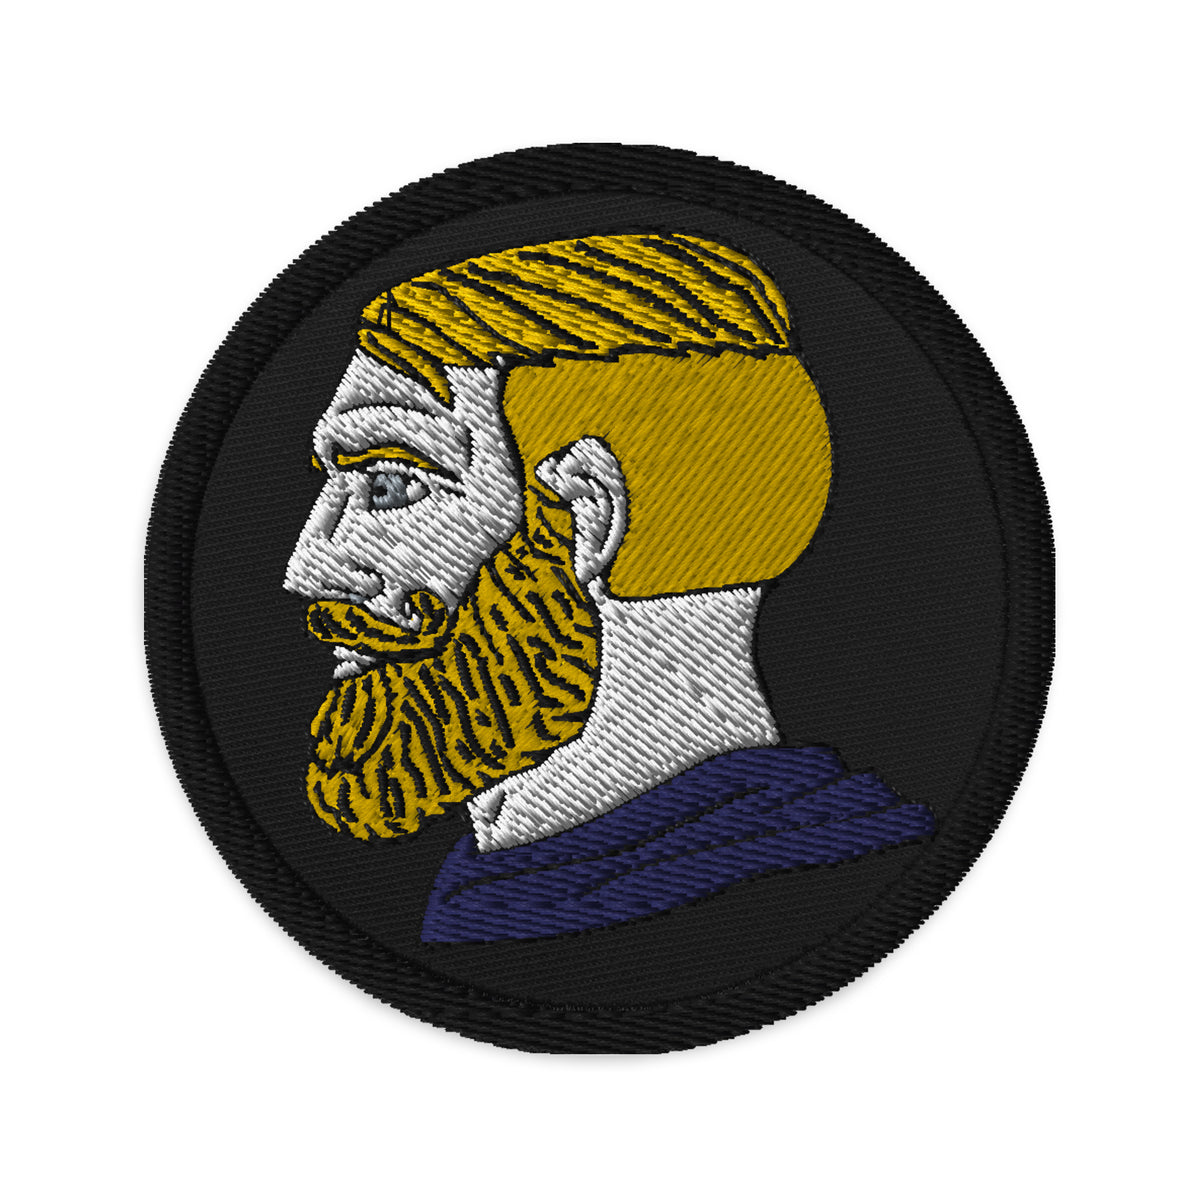 Chad Meme Patch 843 2 Inch Diameter Embroidered Patch 